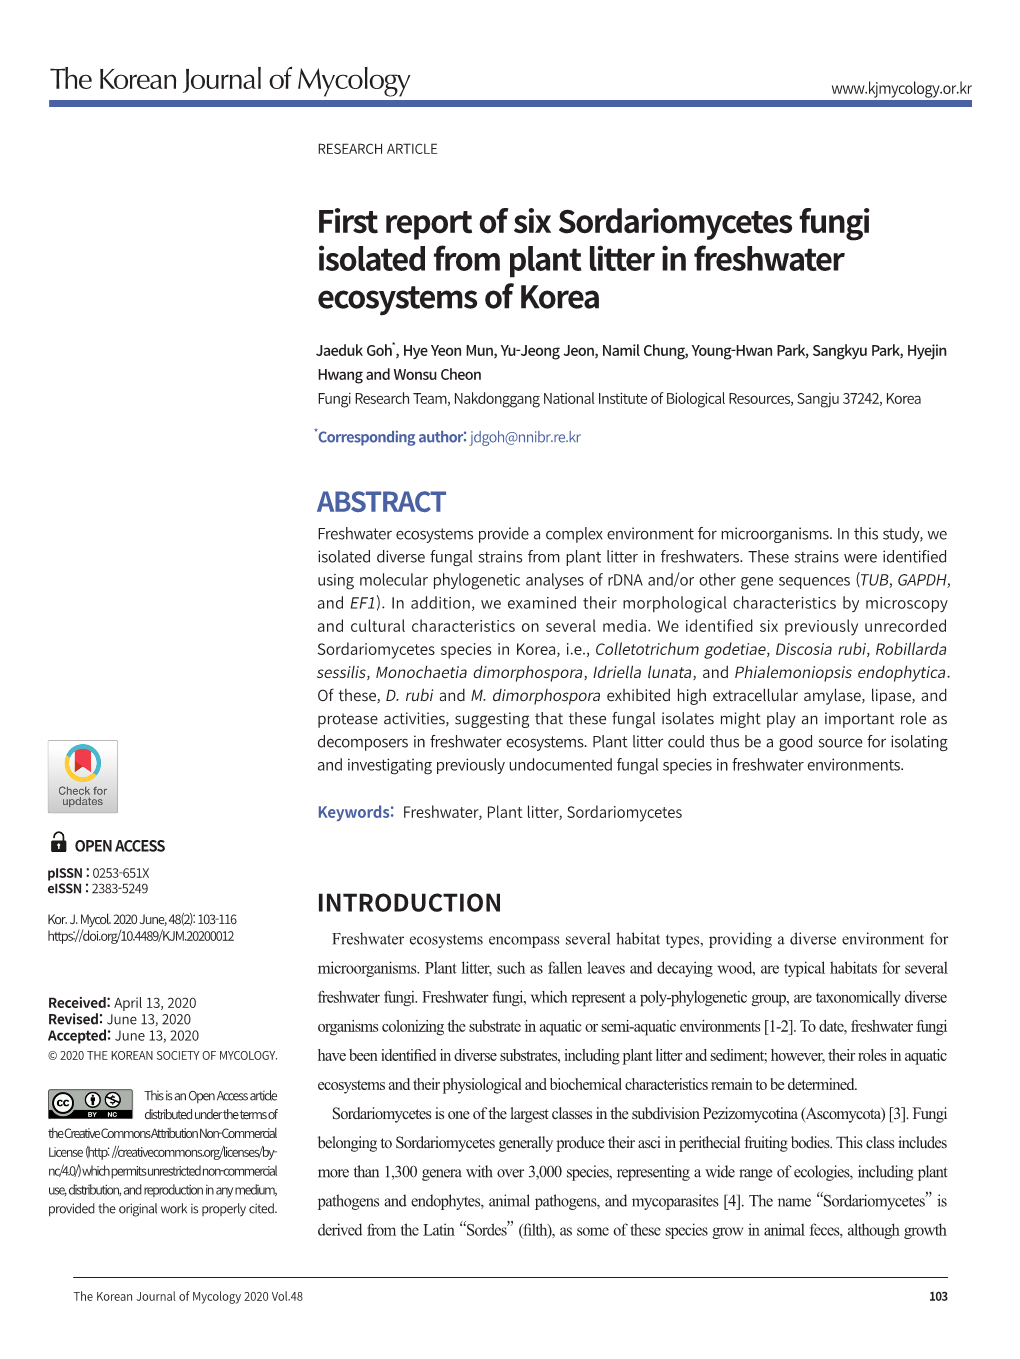 First Report of Six Sordariomycetes Fungi Isolated from Plant Litter in Freshwater Ecosystems of Korea